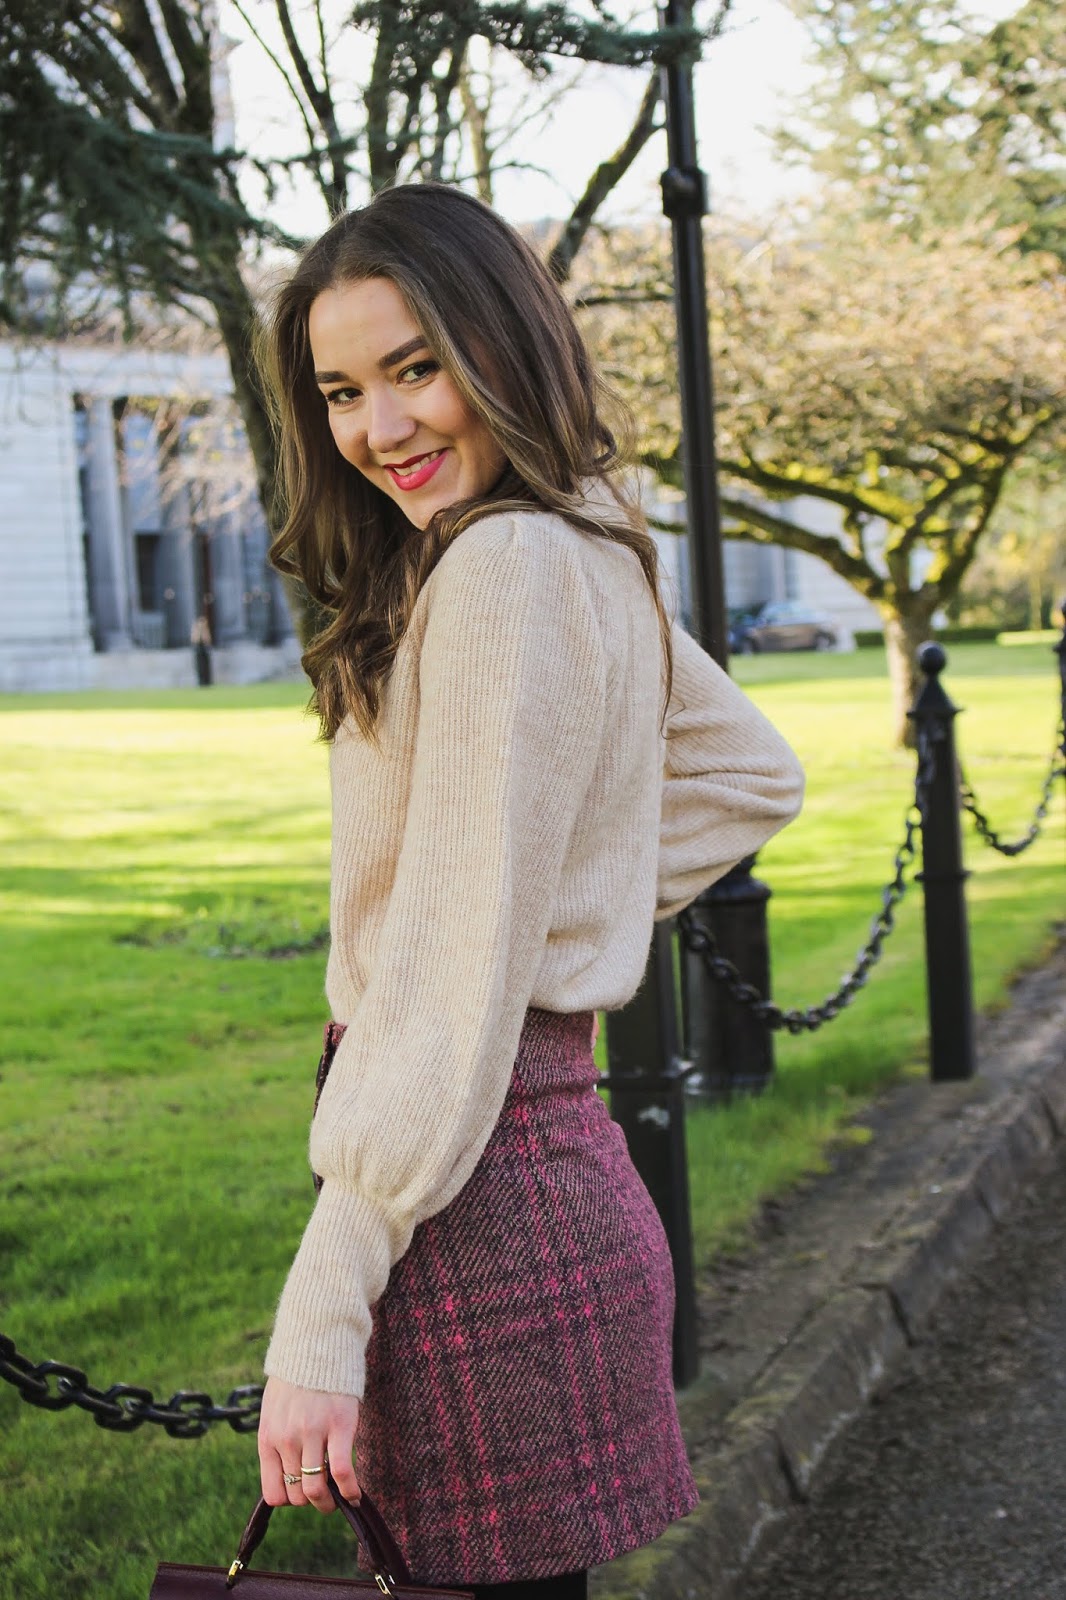 Spring Girly Outfit :: Check Tweed Miniskirt and Cozy Beige Sweater ...